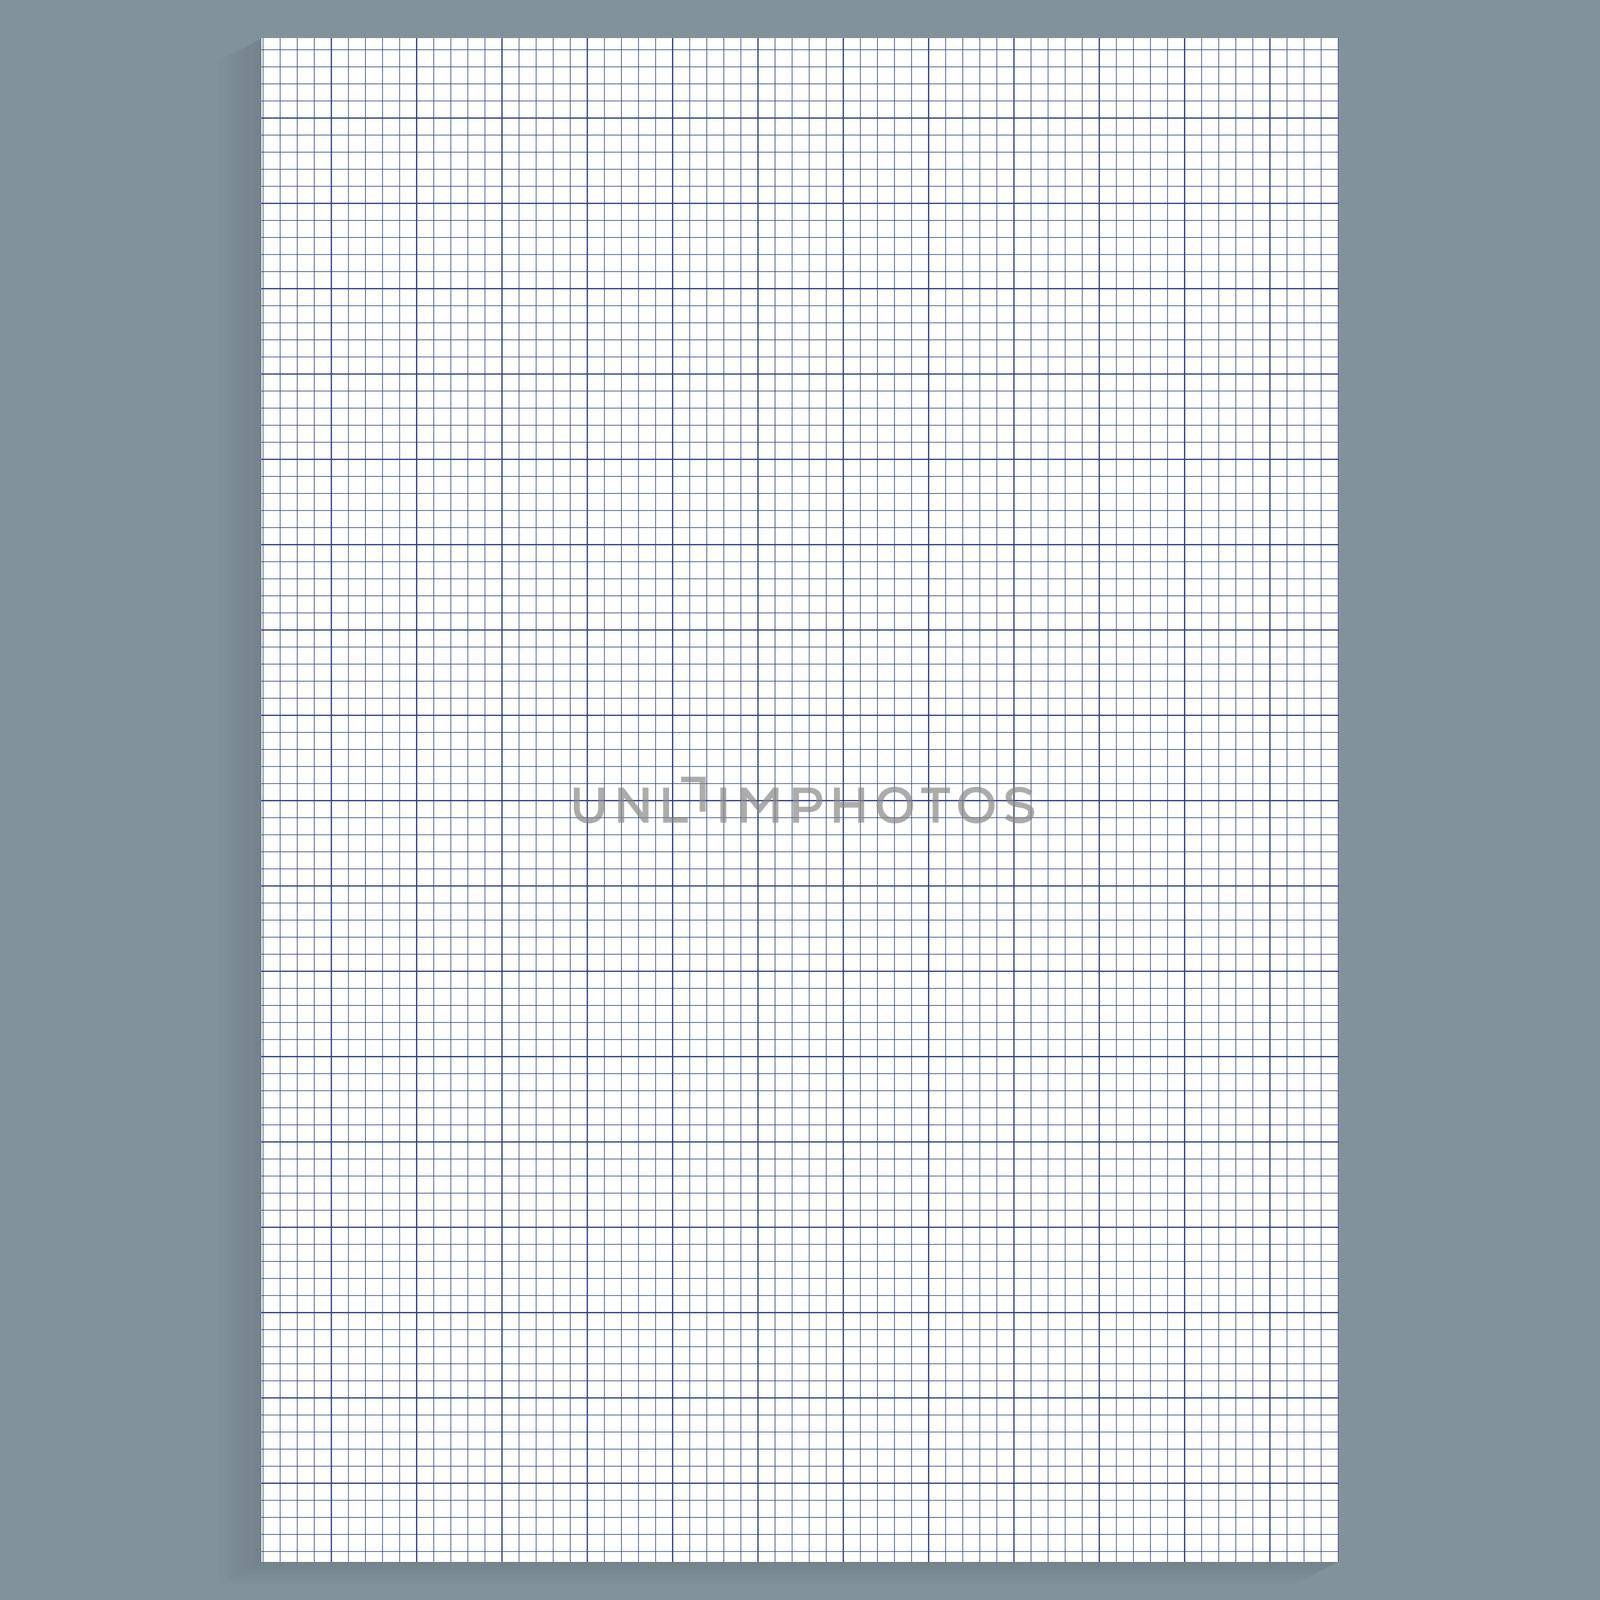 Grid paper. Realistic blank lined paper sheet in A4 format. Squared background with color graph. Geometric pattern for school, wallpaper, textures, notebook. Lined blank on transparent background.